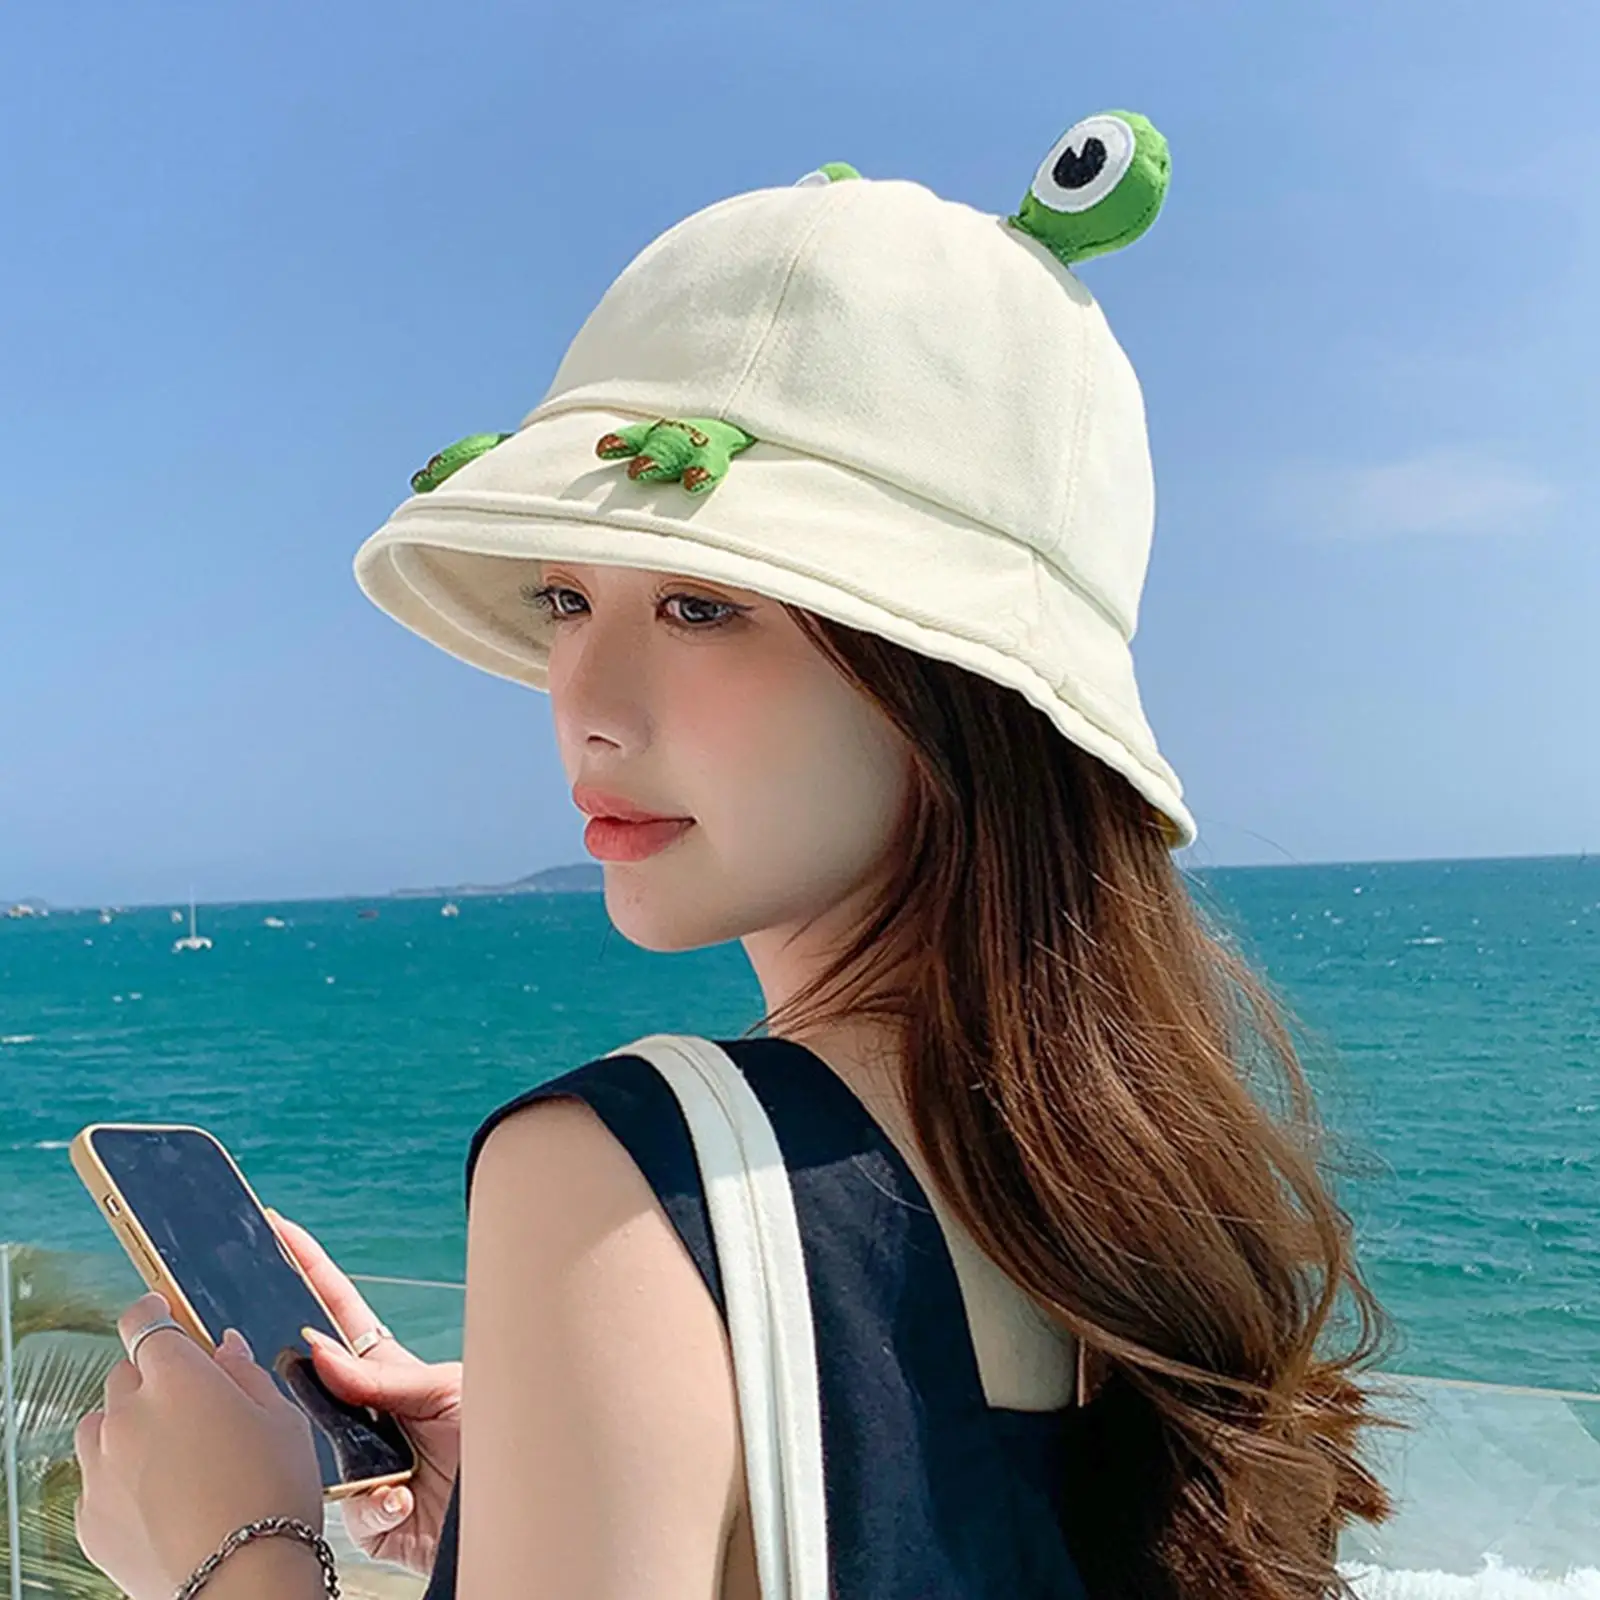 Frog Bucket Hat Party Hat Adjustable Photo Props Sun Protection Cotton Fisherman Caps for Dress up Outdoor Travel Spring Girls